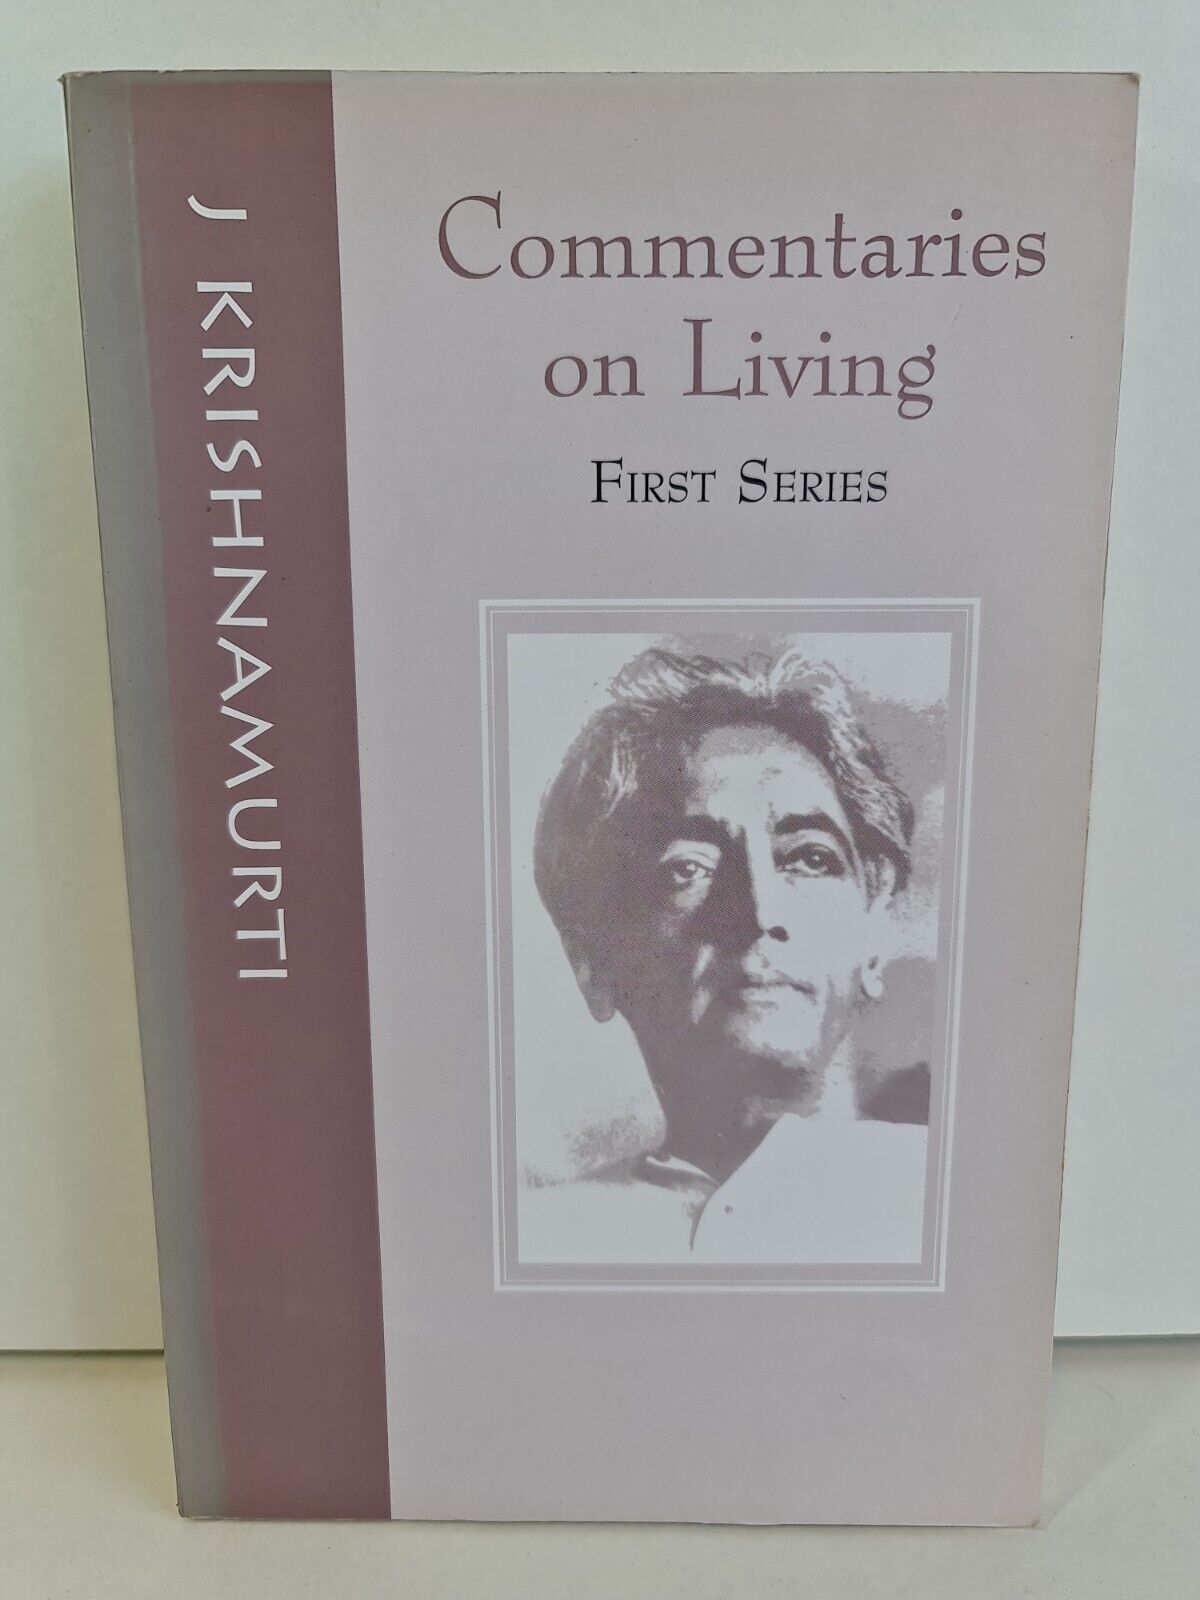 Commentaries on Living- First Series by J Krishnamurti (1999)